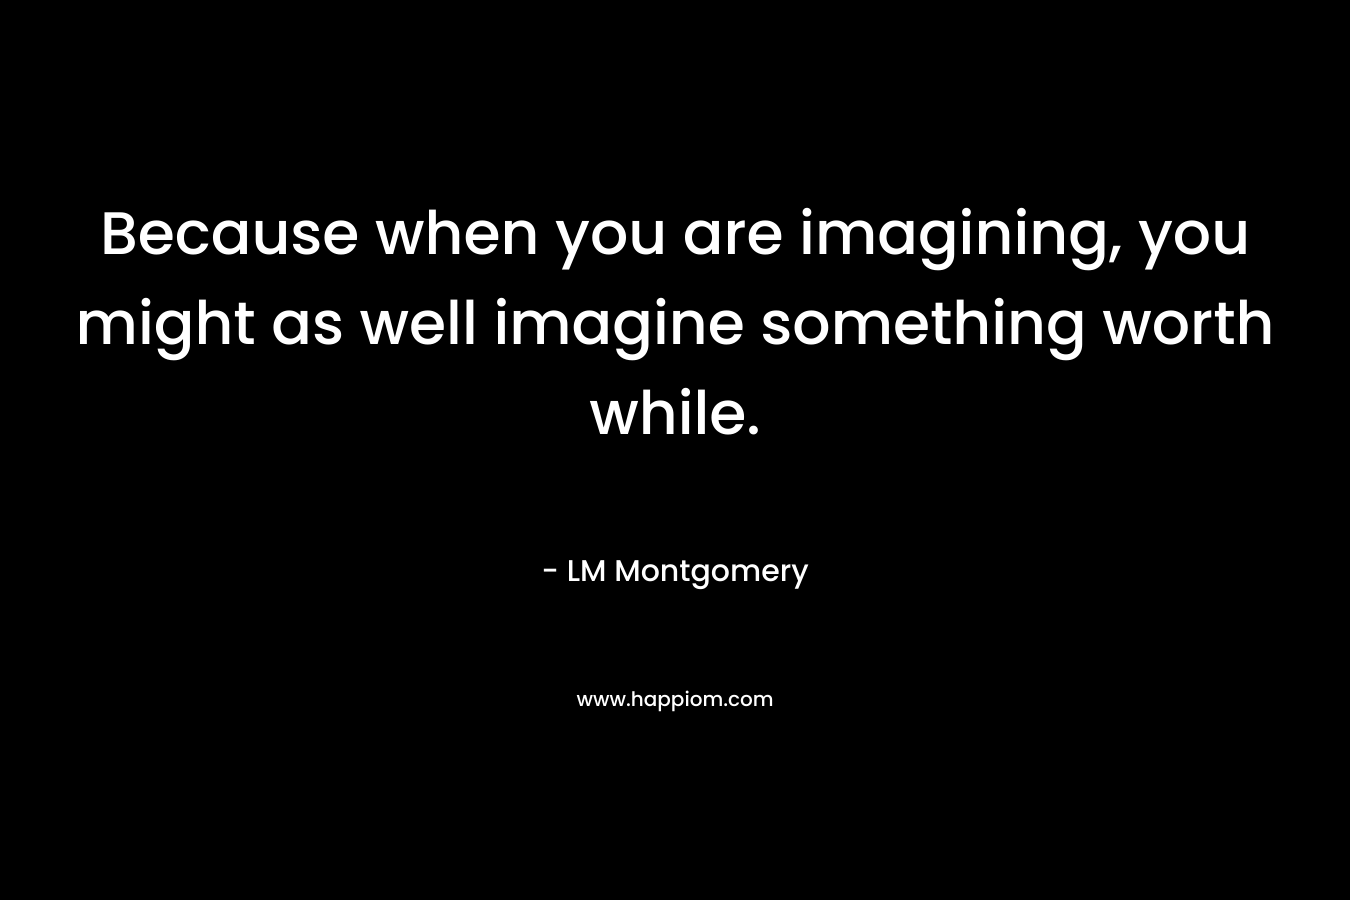 Because when you are imagining, you might as well imagine something worth while.